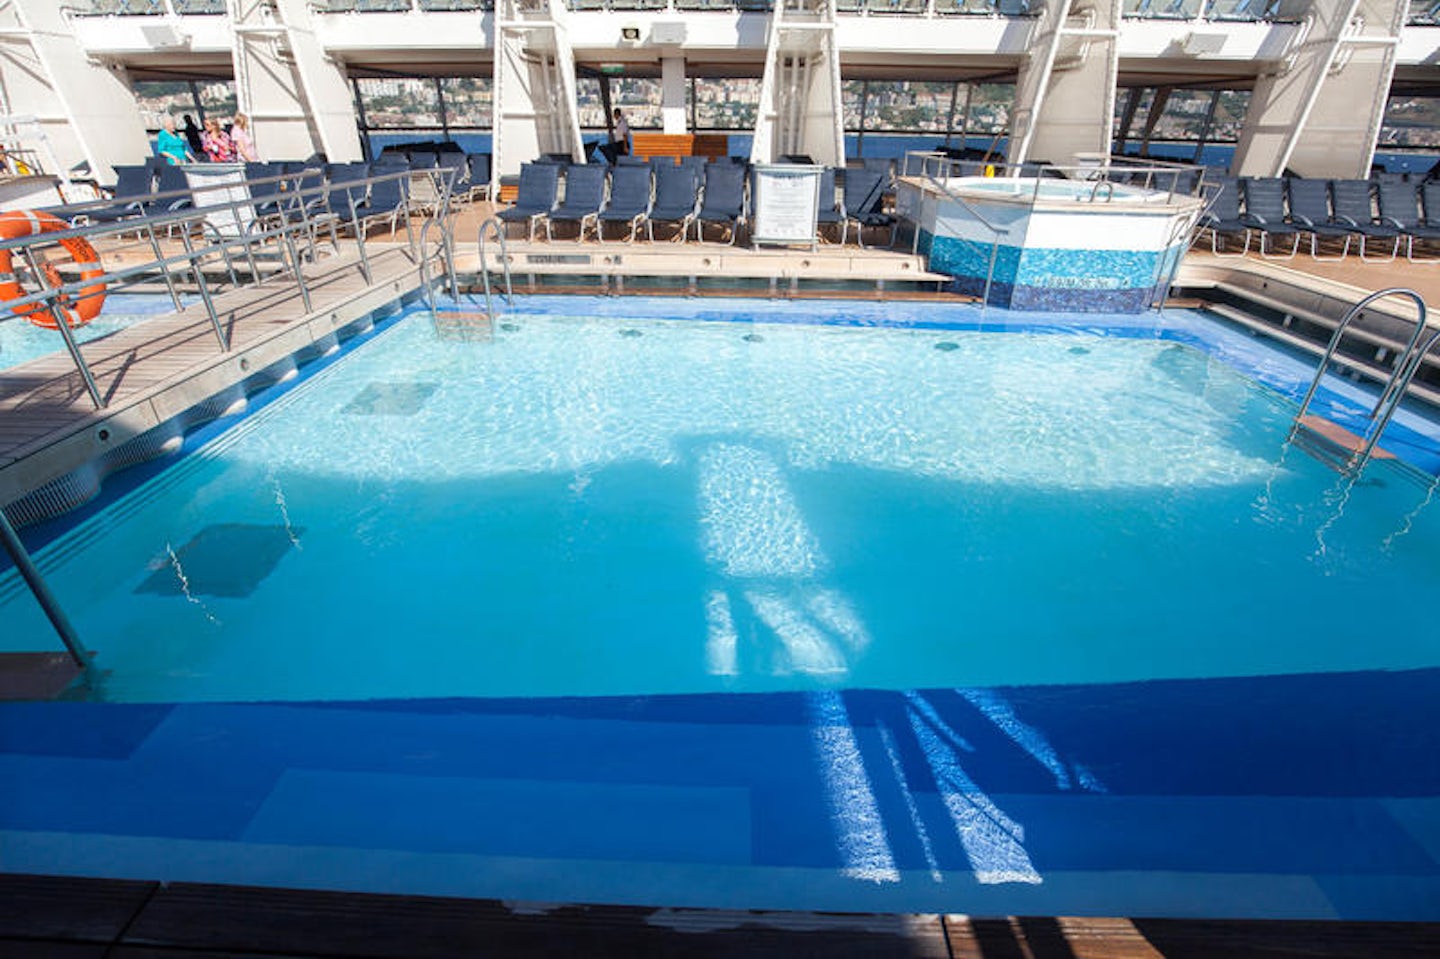 The Pool on Celebrity Reflection